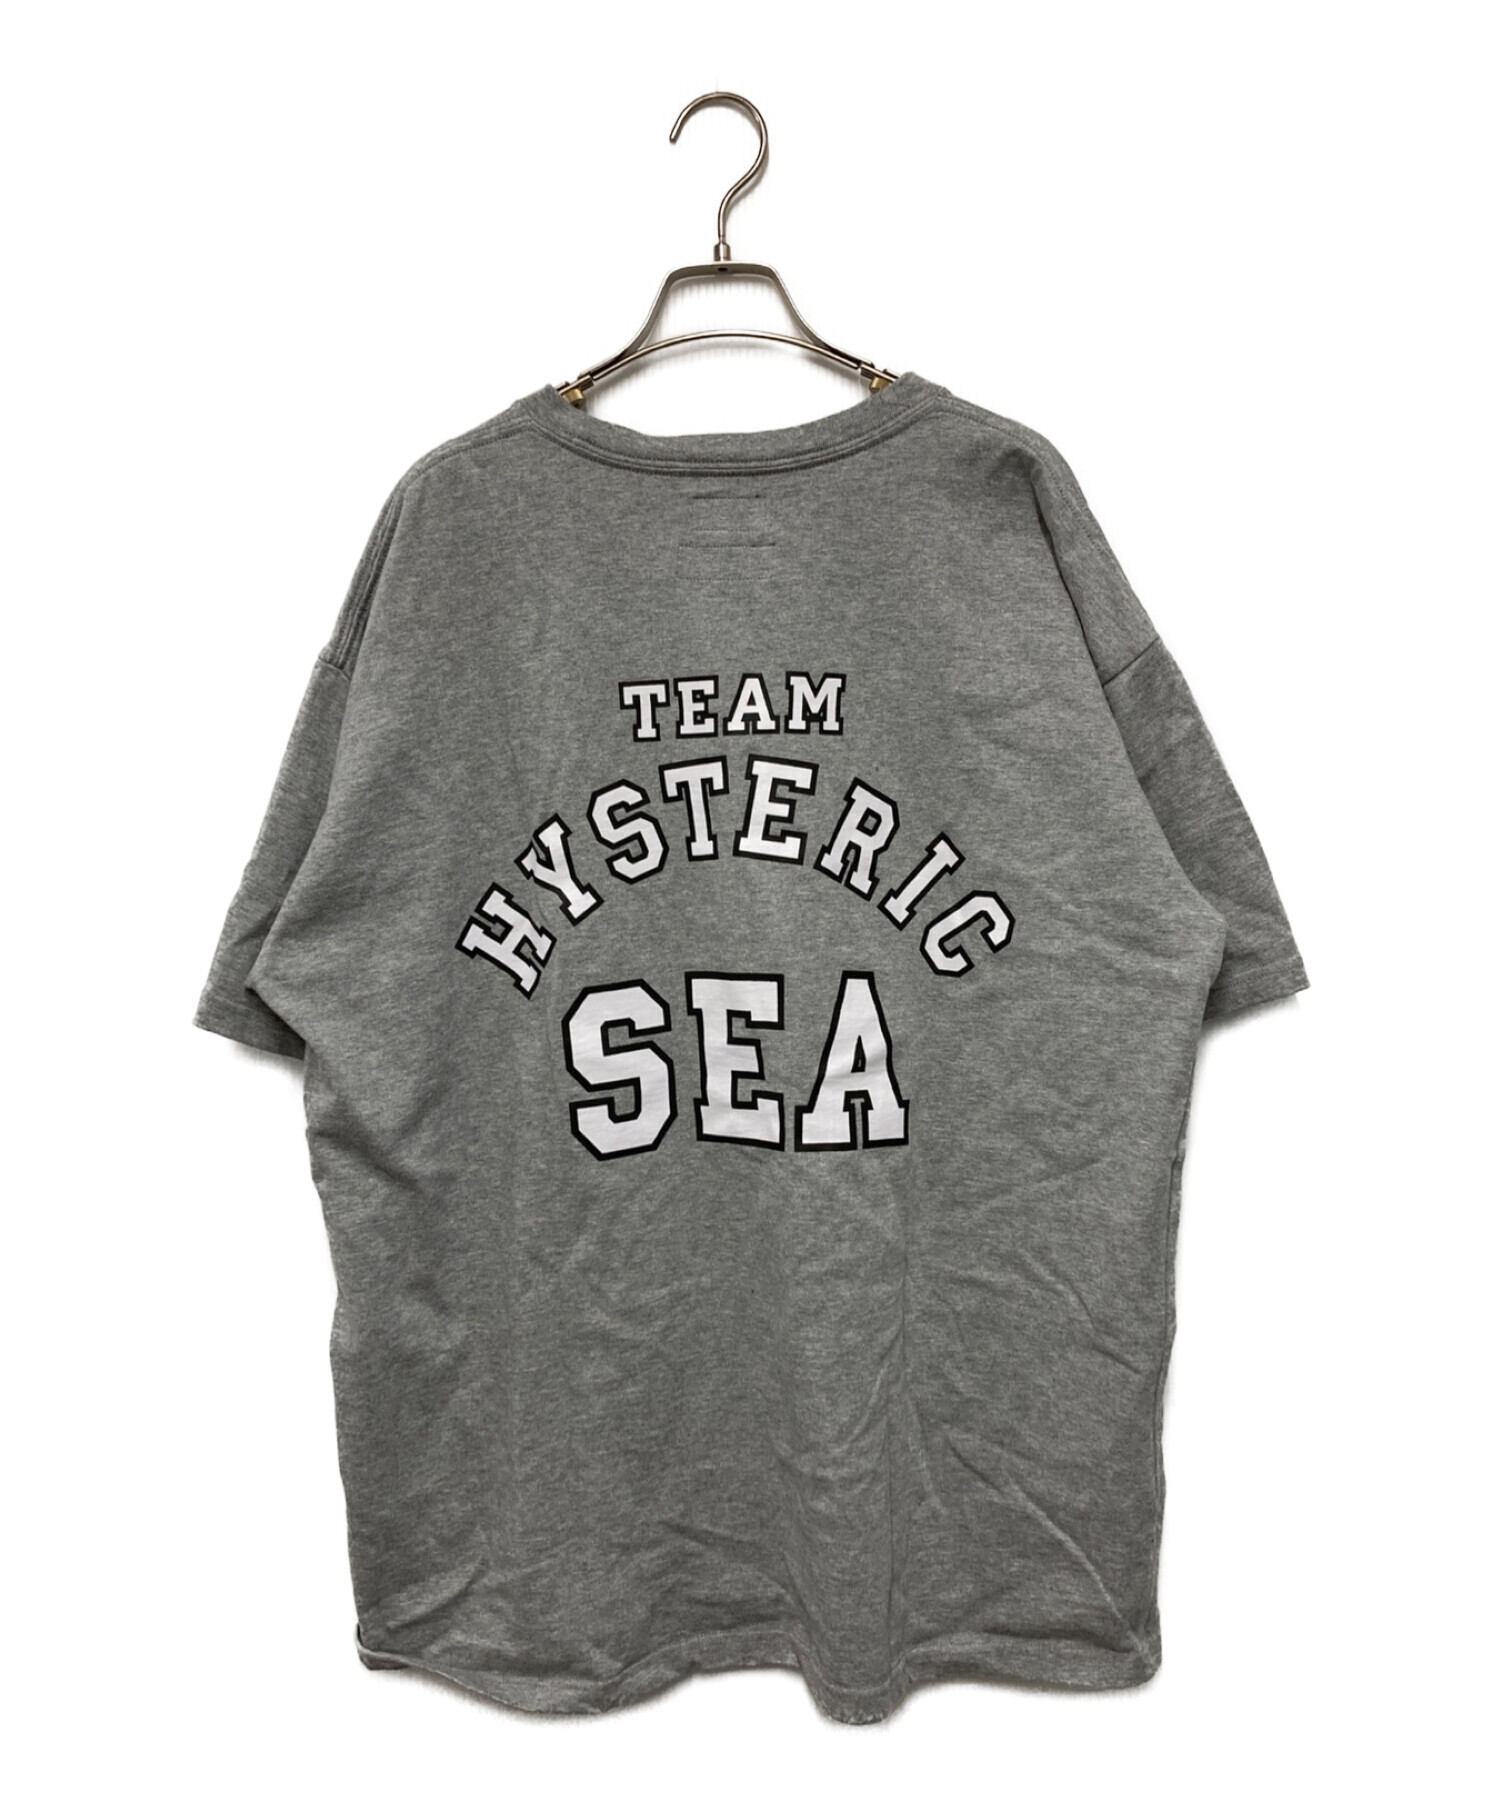 HYSTERIC GLAMOUR WIND AND SEA Tシャツ　XL